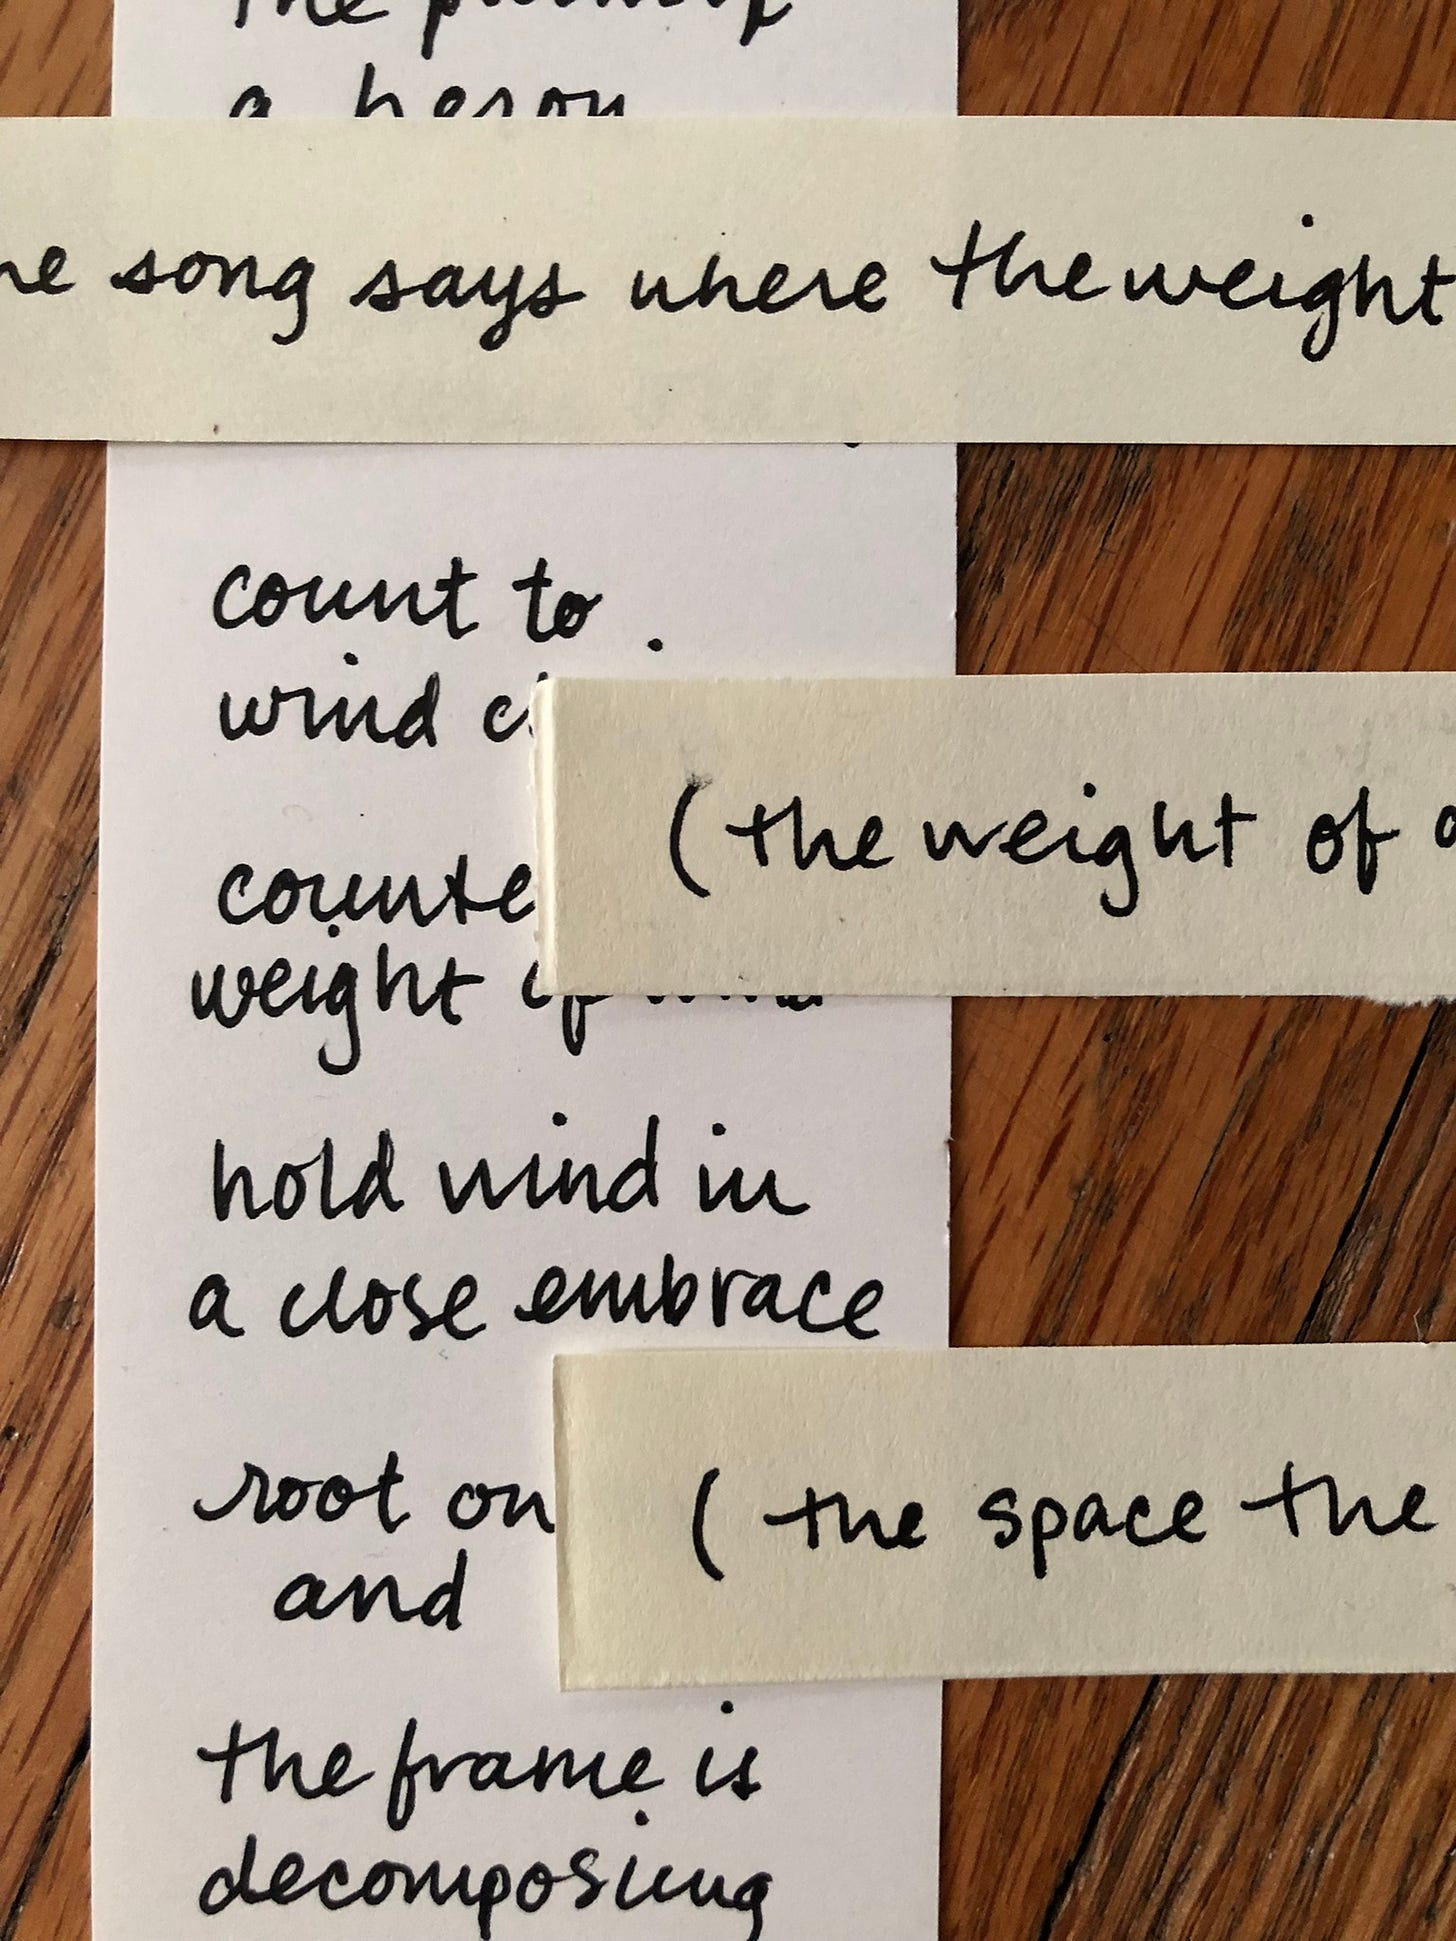 overlapping pieces of paper with handwritten text on a wood background